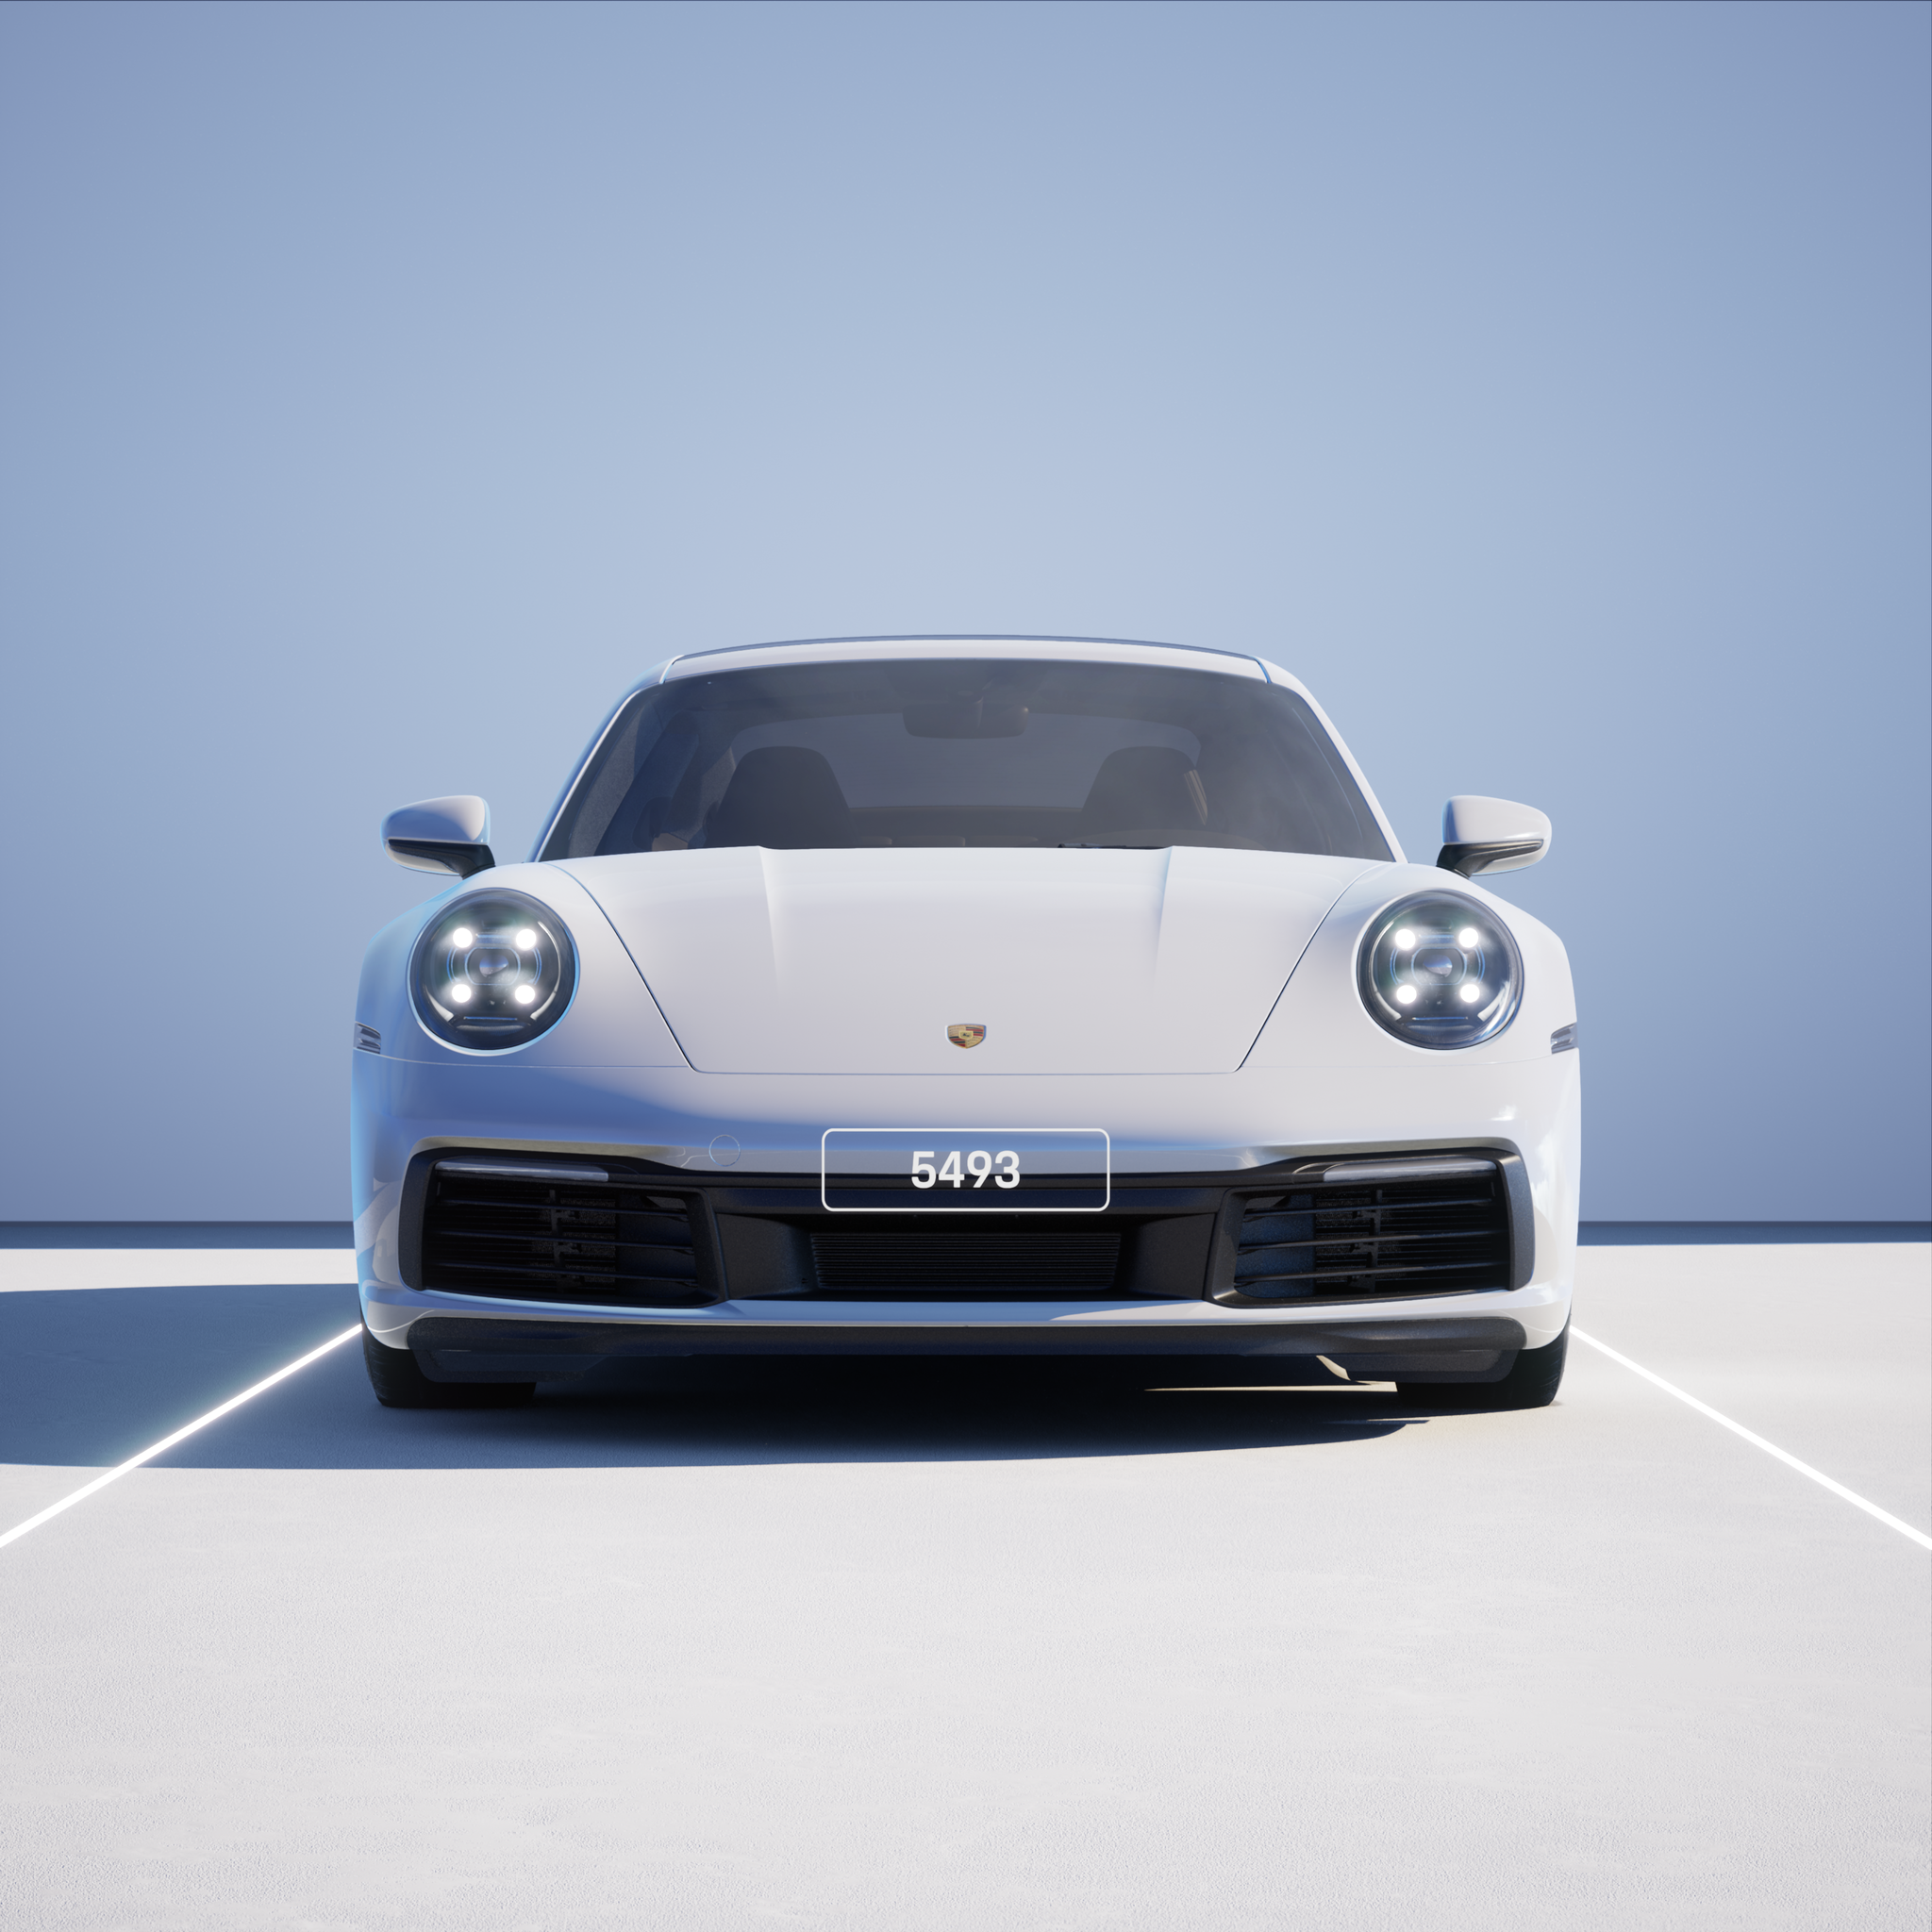 The PORSCHΞ 911 5493 image in phase